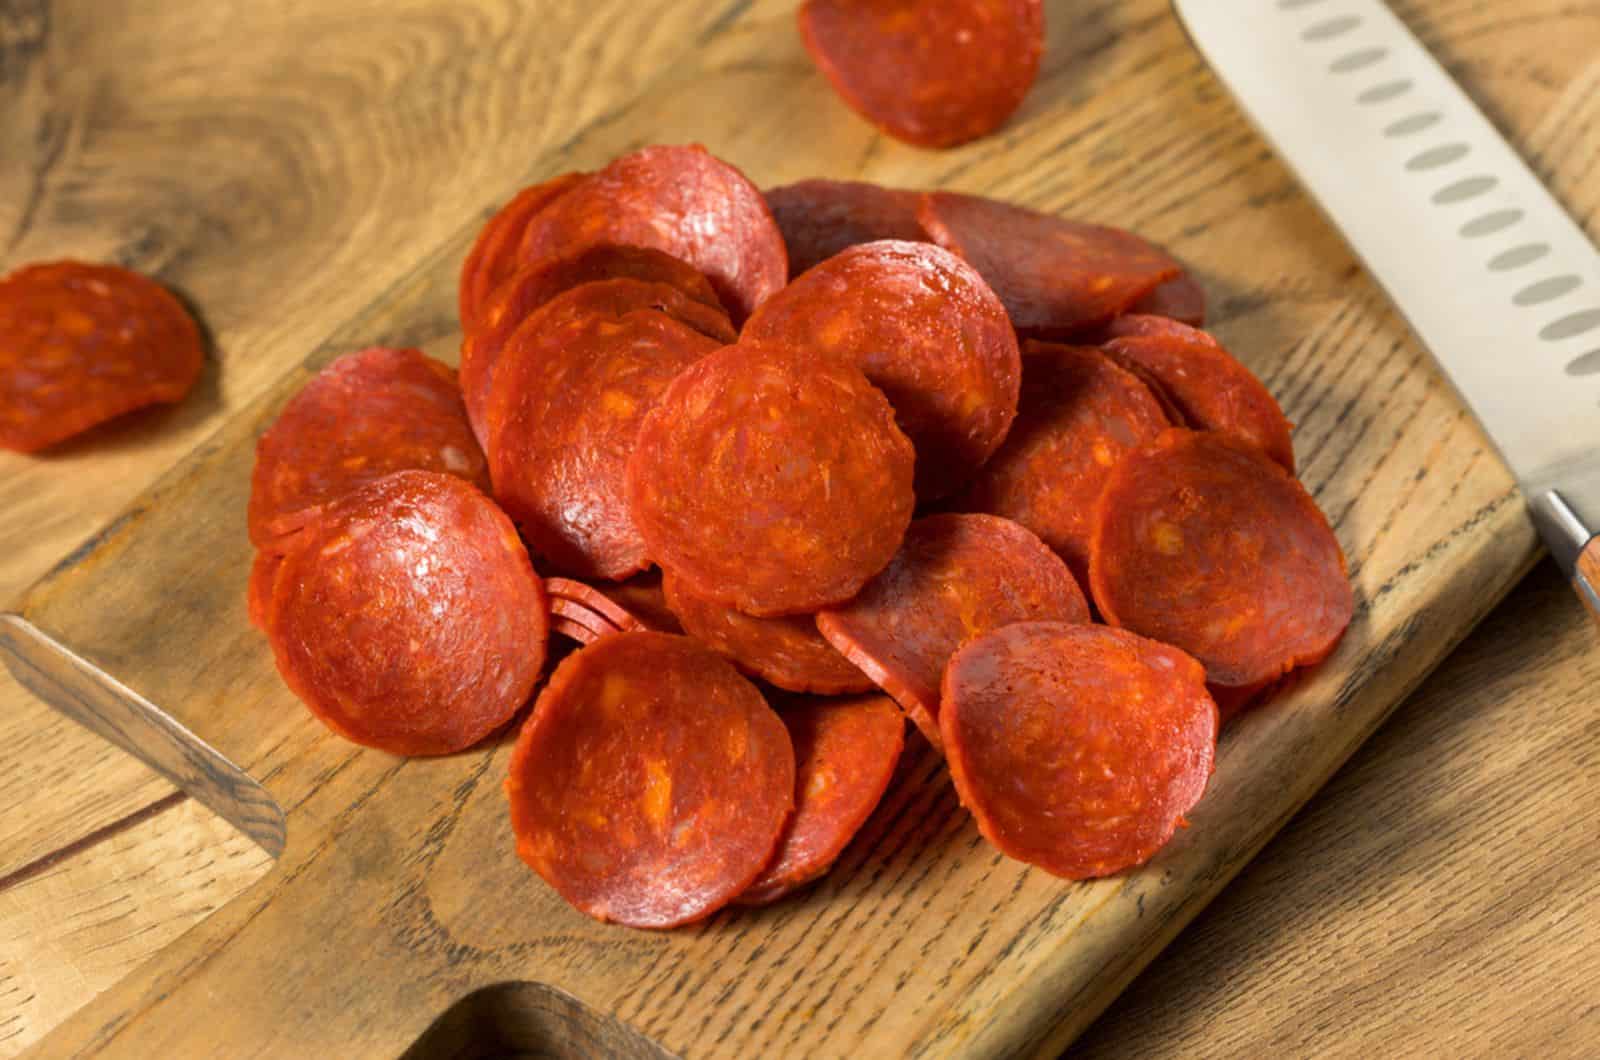 organic uncured italian pepperoni slices ready to use